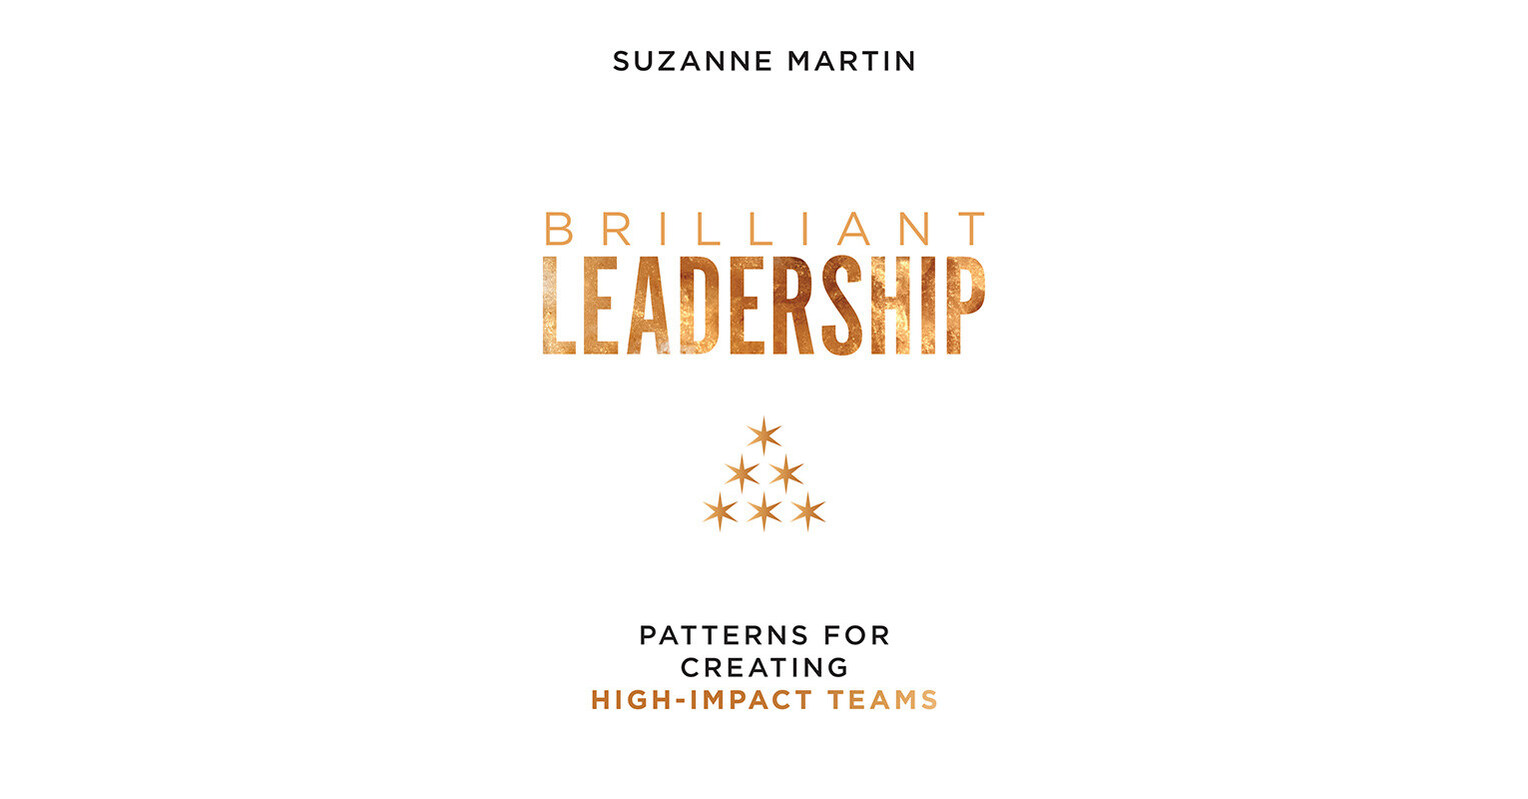 NEW BOOK CONTAINS CUTTING-EDGE RESEARCH ON ADAPTING LEADERSHIP STYLES BASED ON NINE DIFFERENT PATTERNS